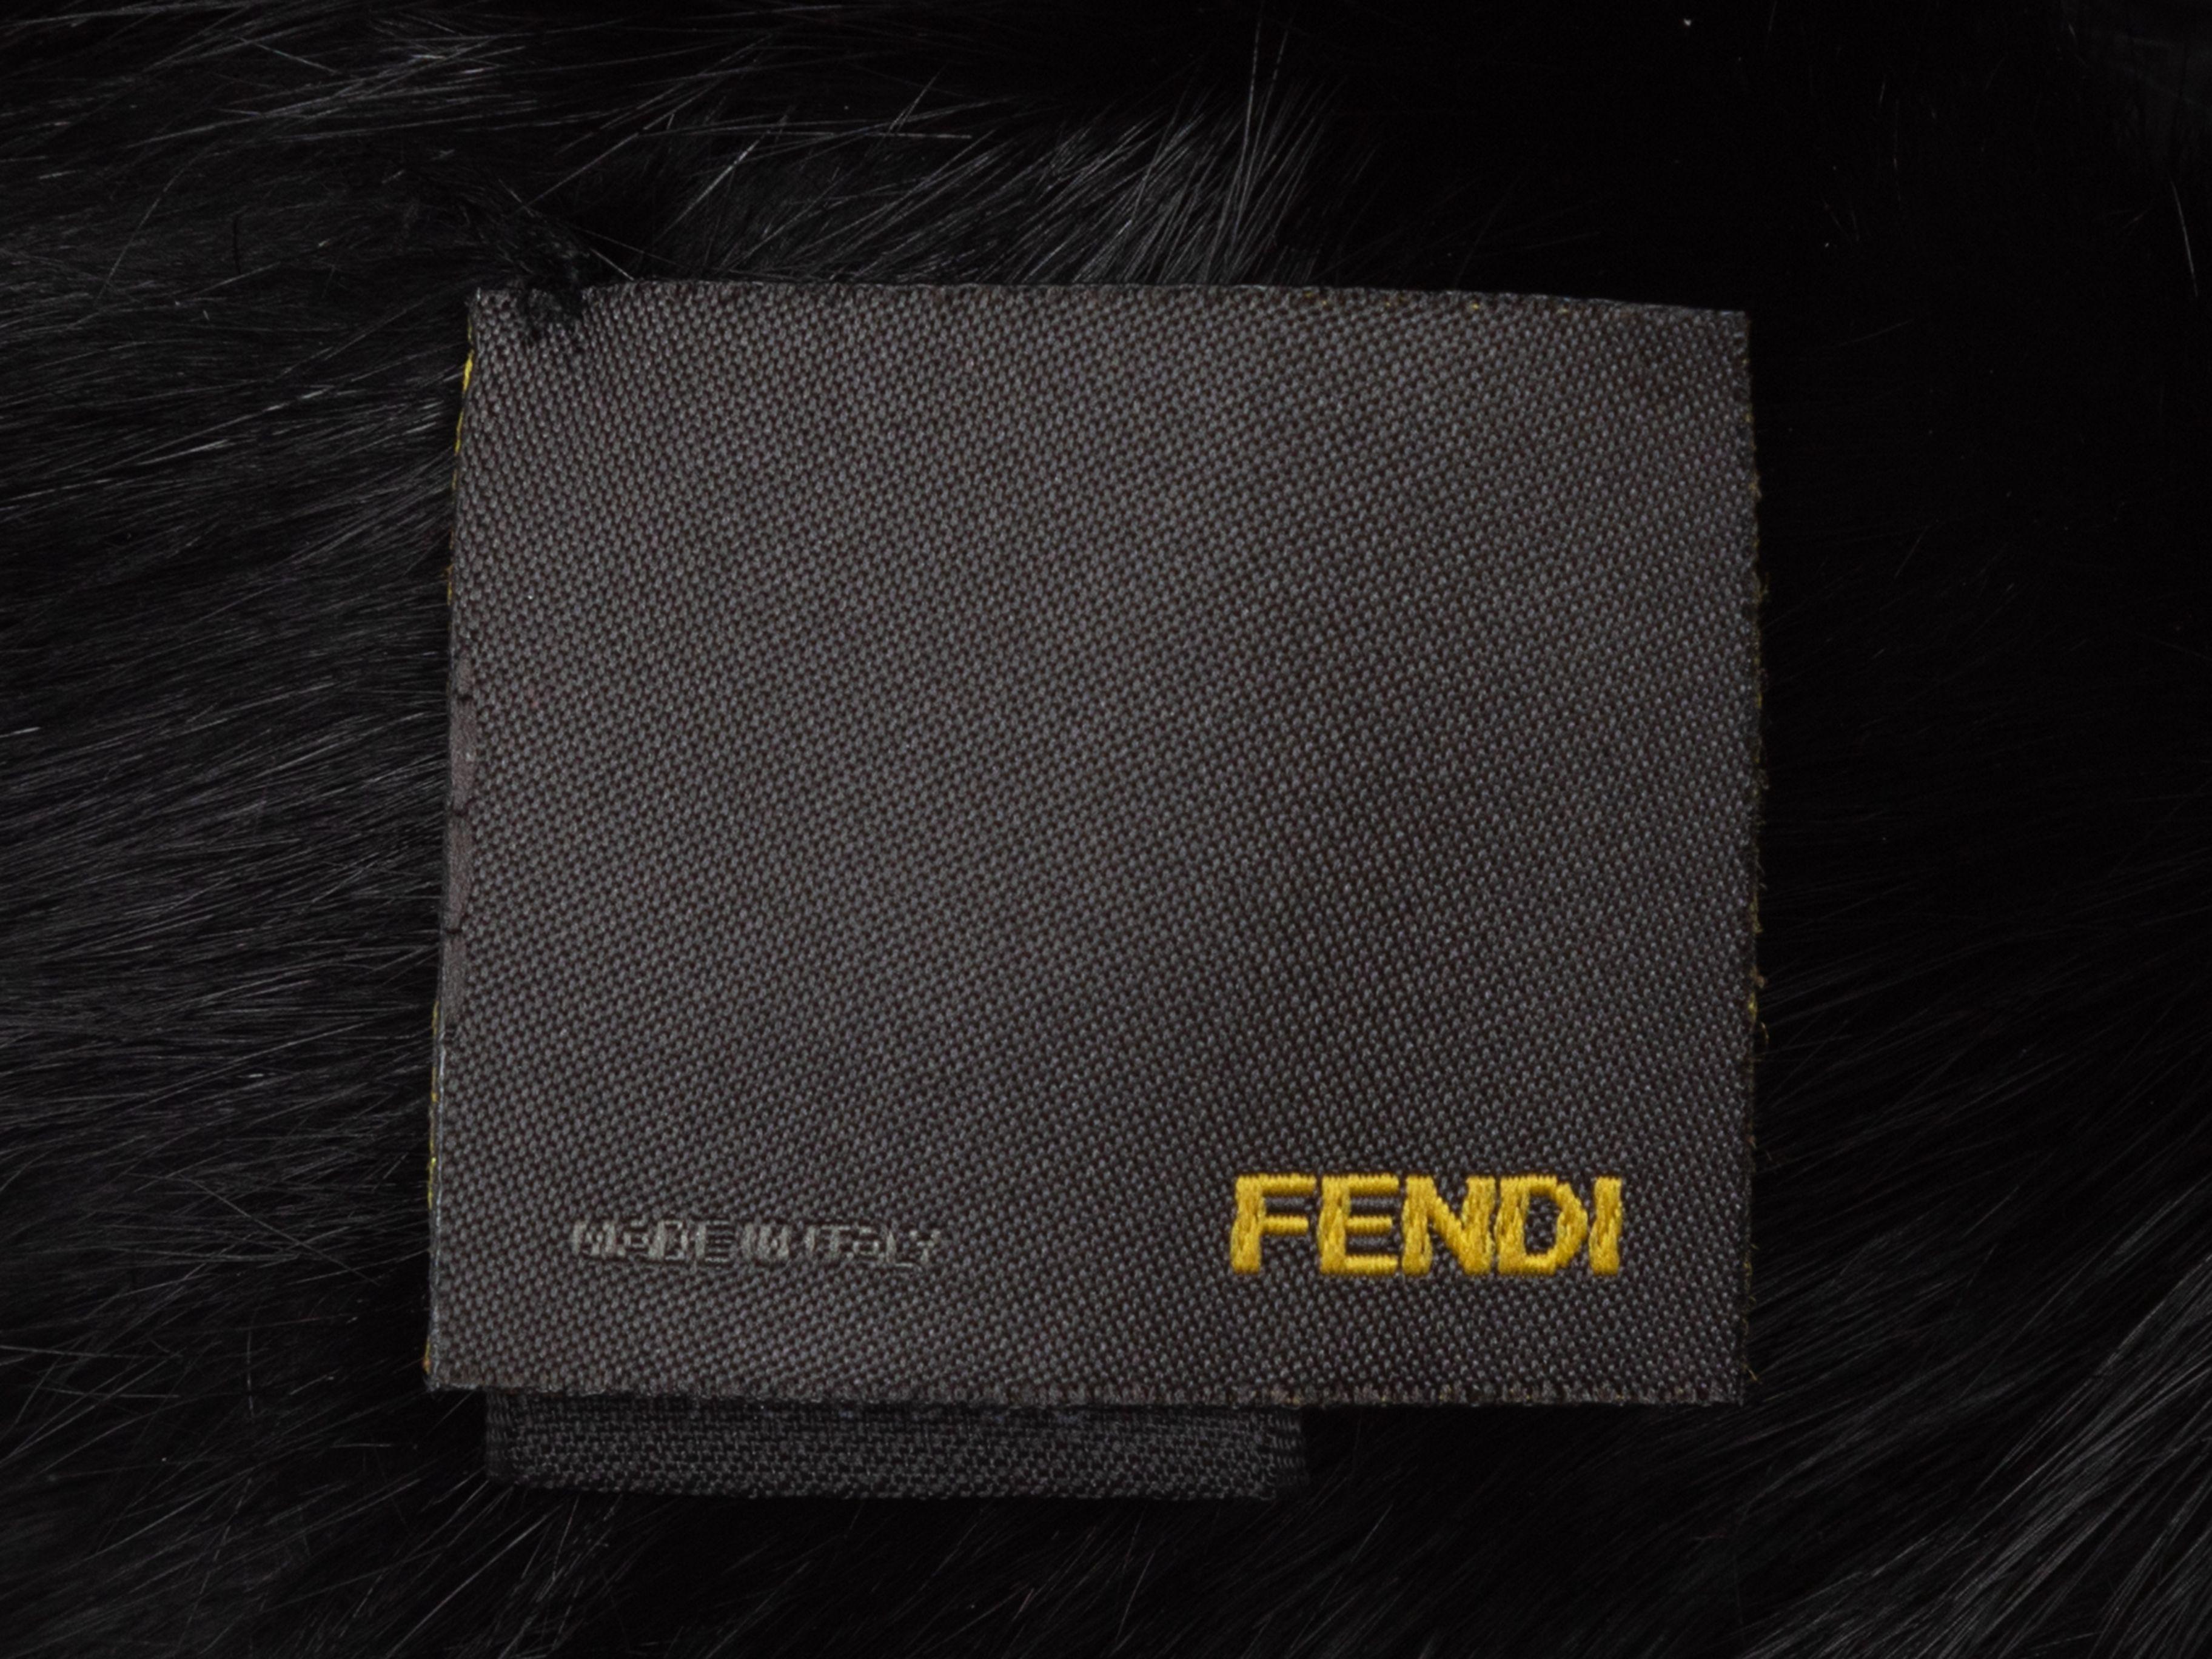 Product Details: Brown and black wool Zucca intarsia patterned neck warmer by Fendi. Rabbit fur trim at edges. 11